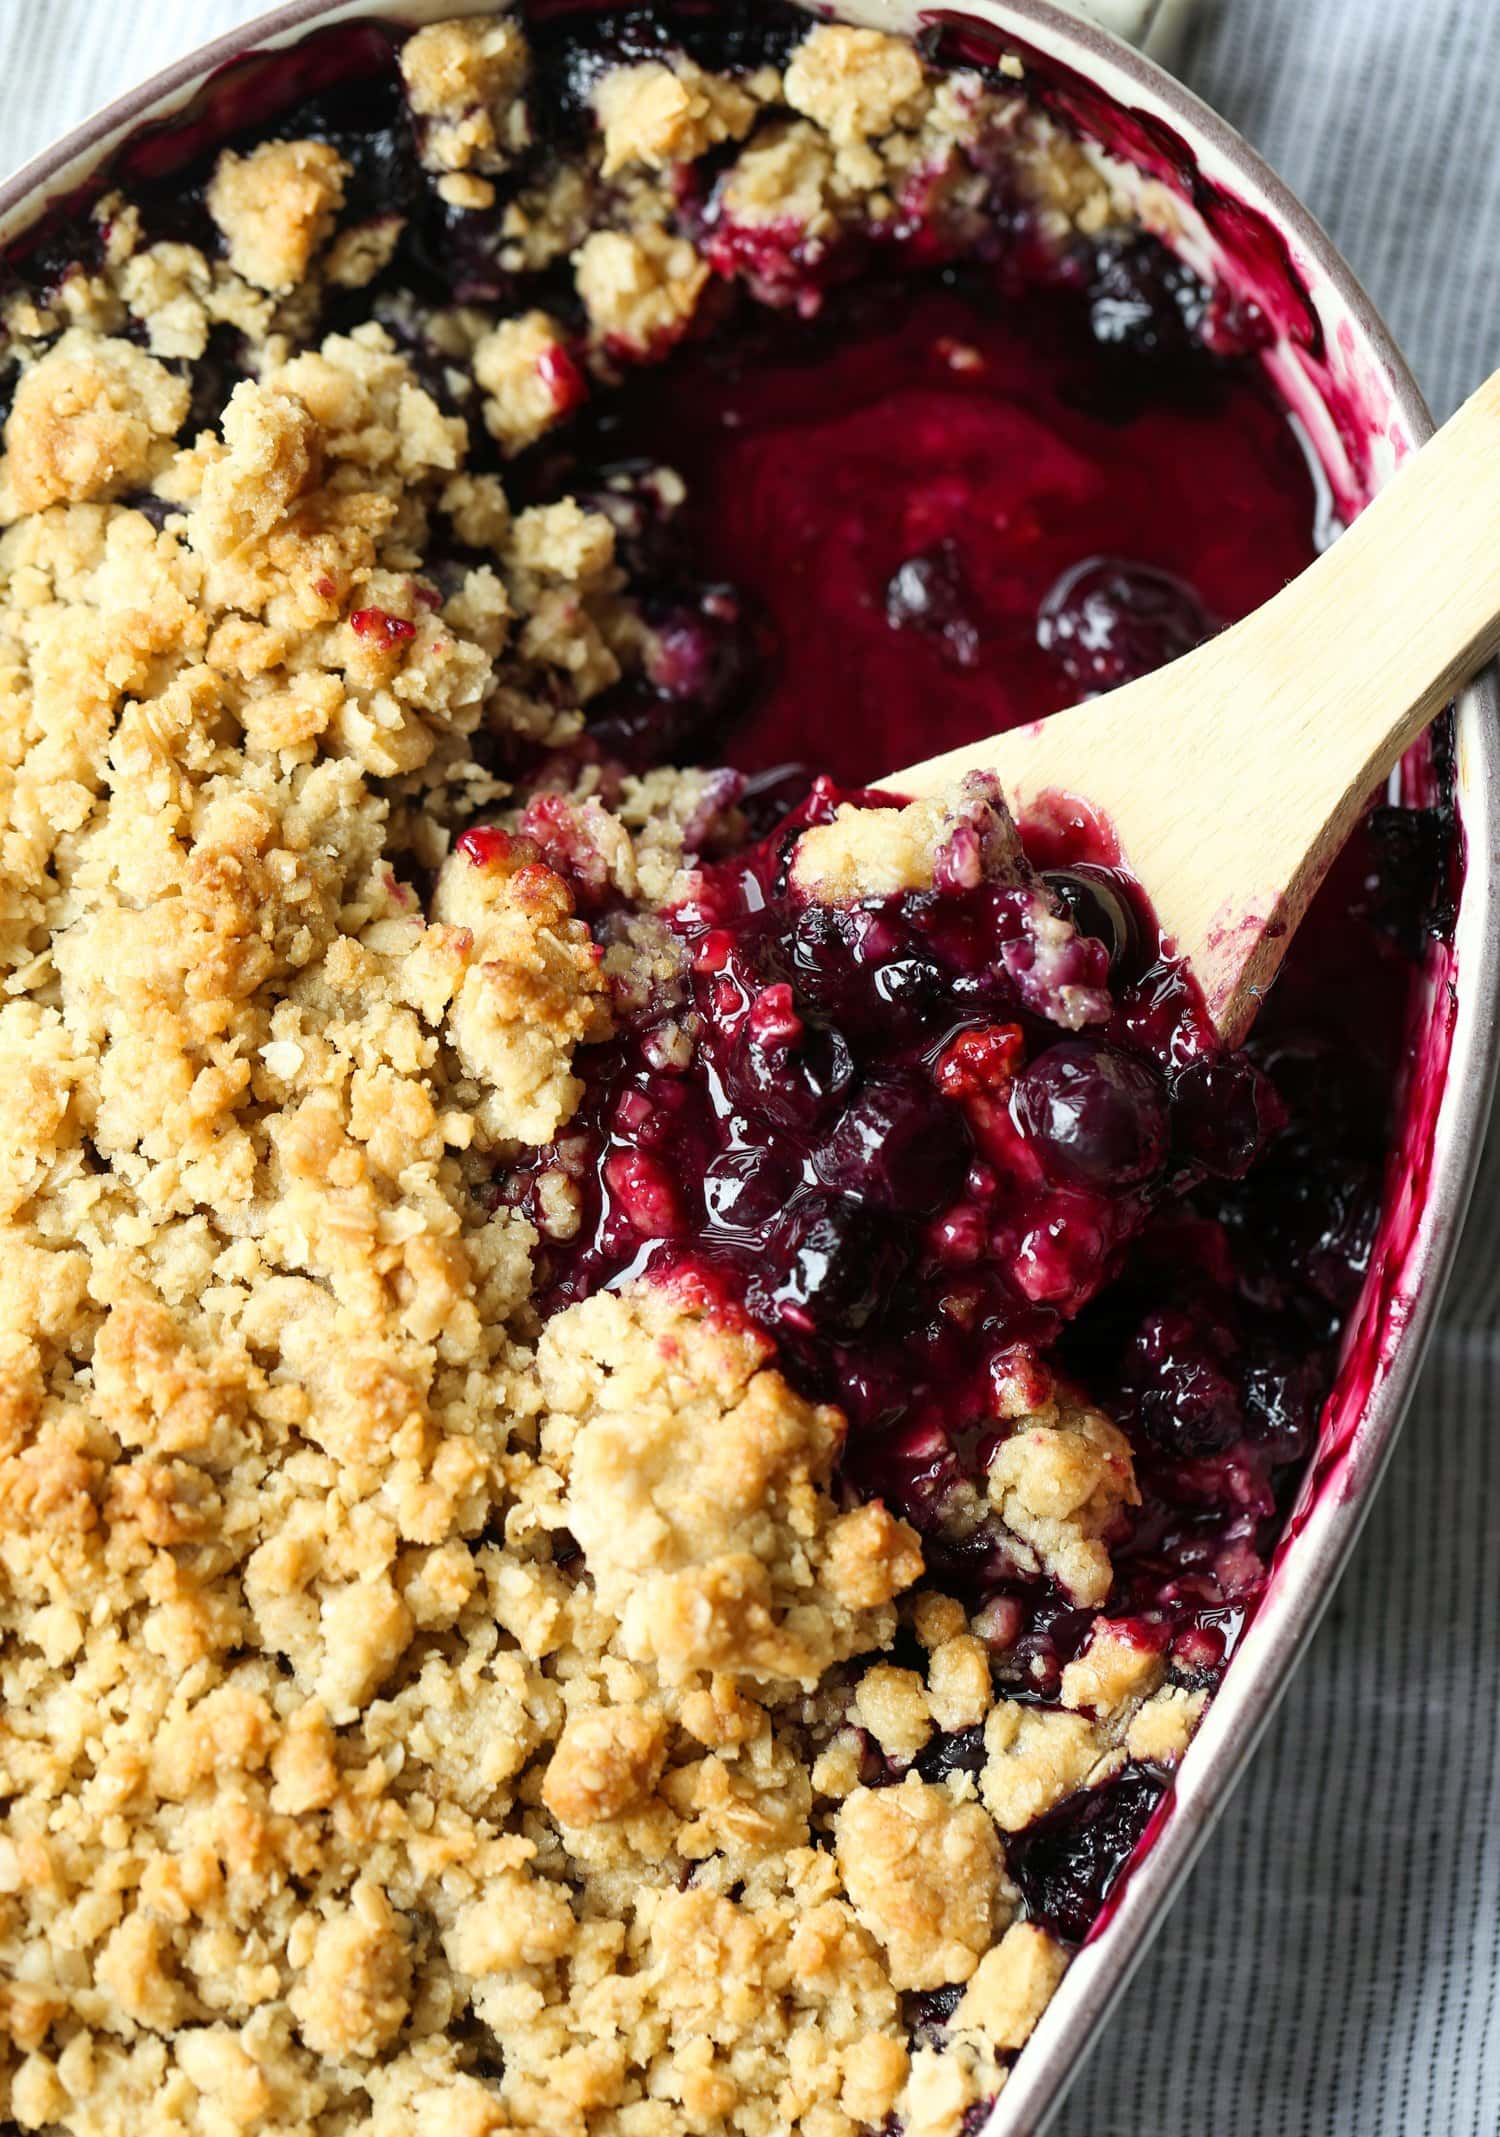 Homemade Blueberry Crumble served in a 9x13 baking dish